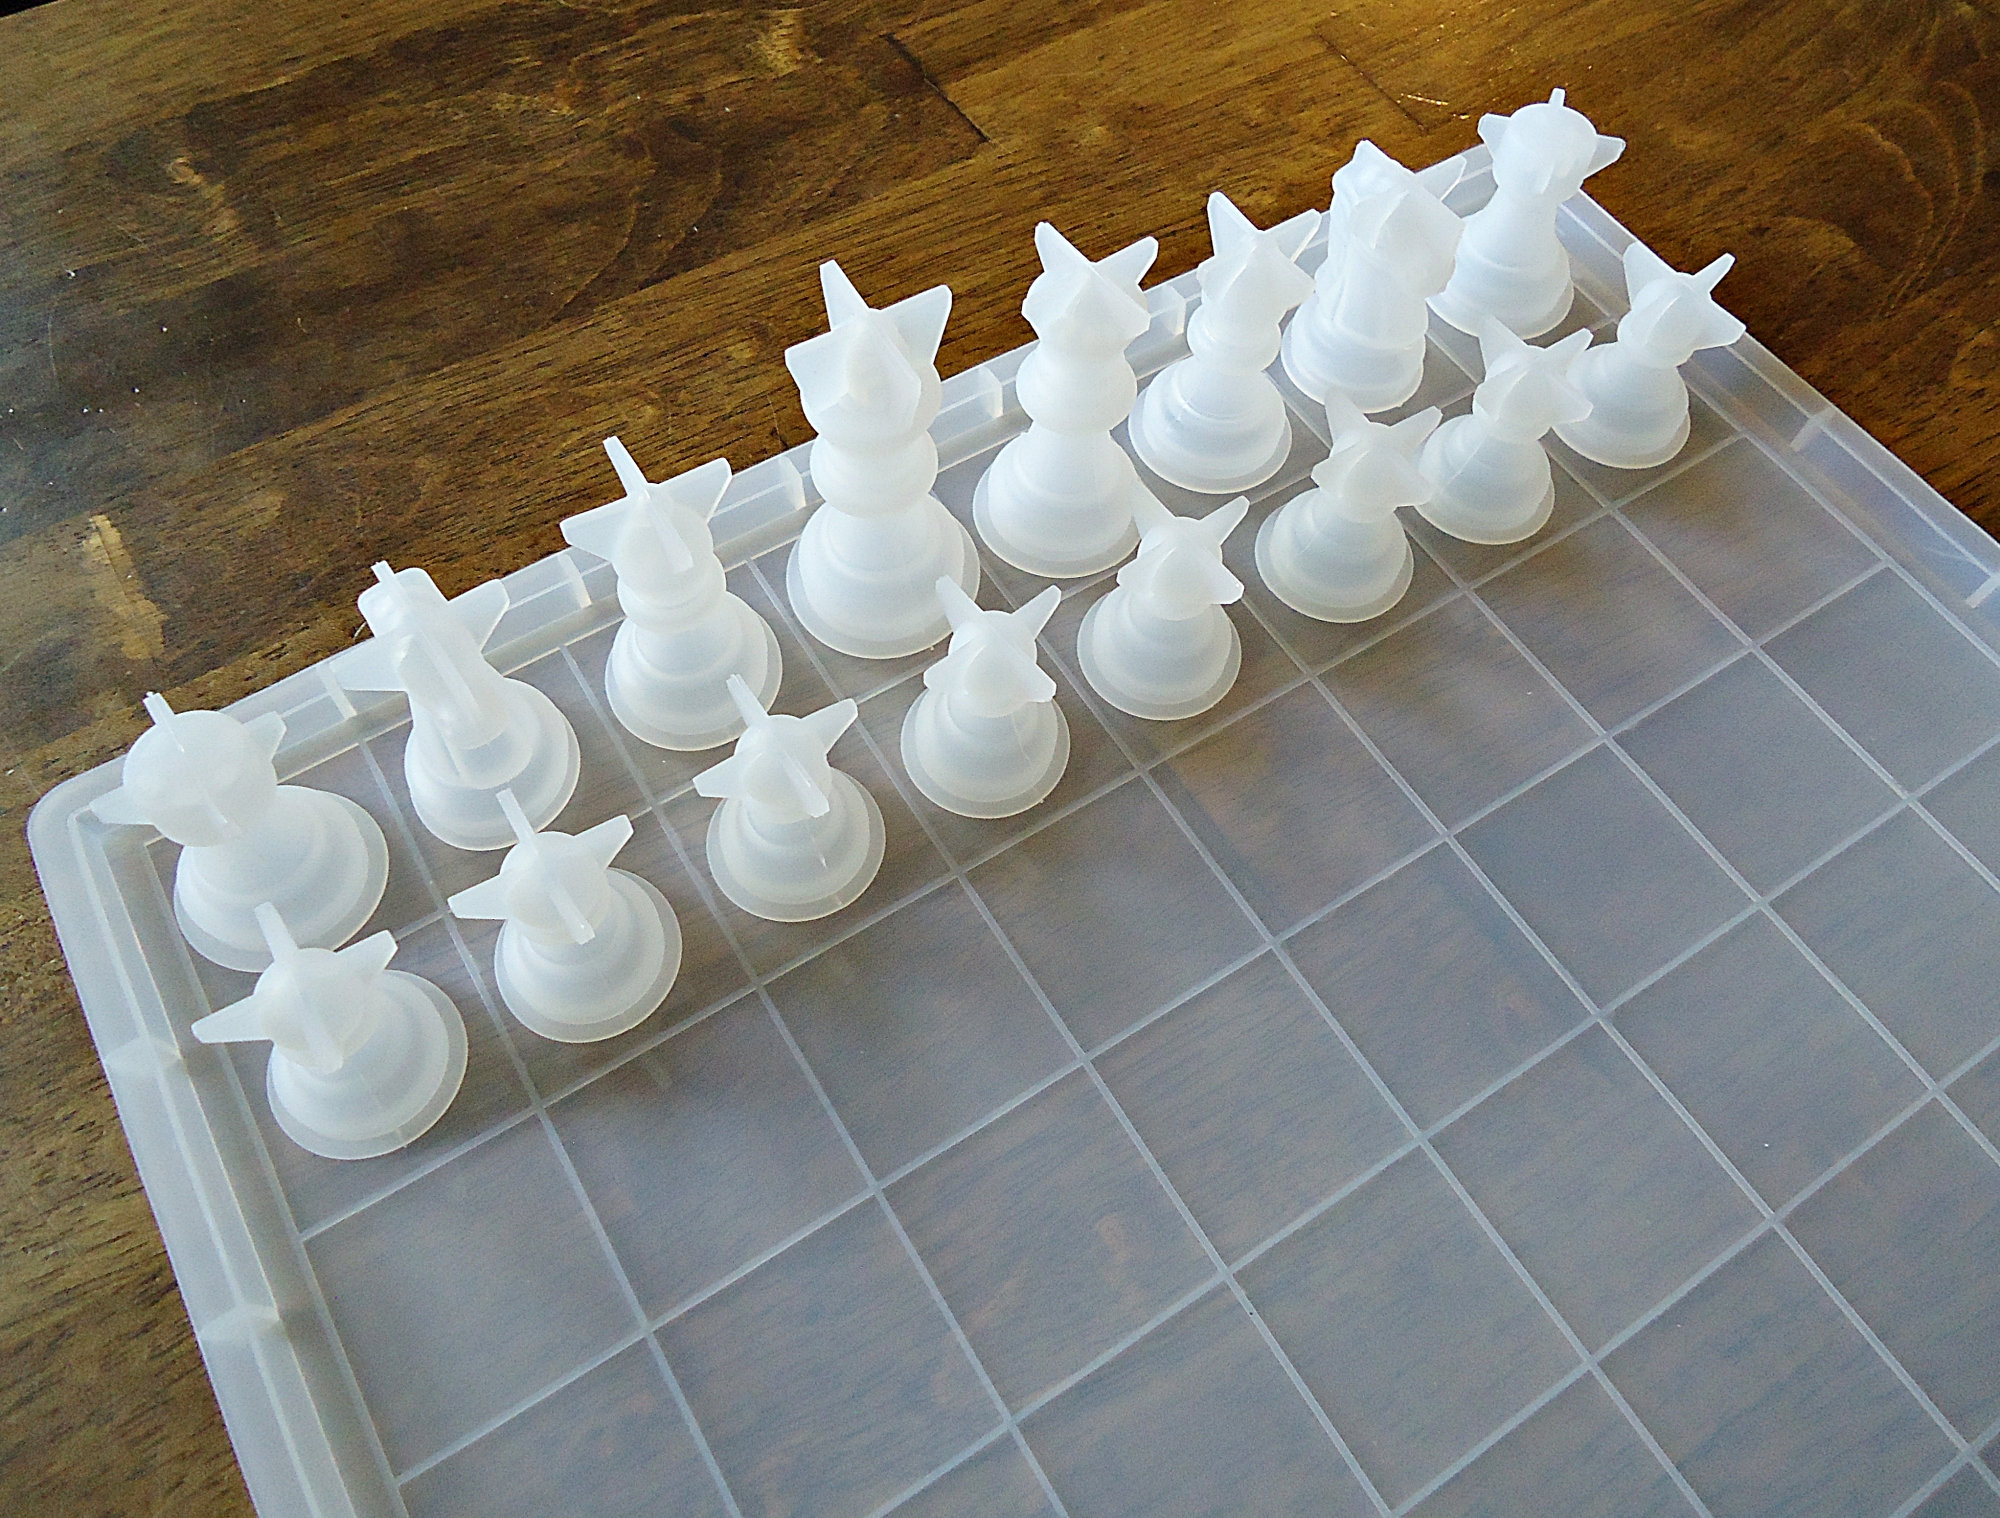 19x19x0.5 Full Size Chess Board Silicone Mold With 2 Squares